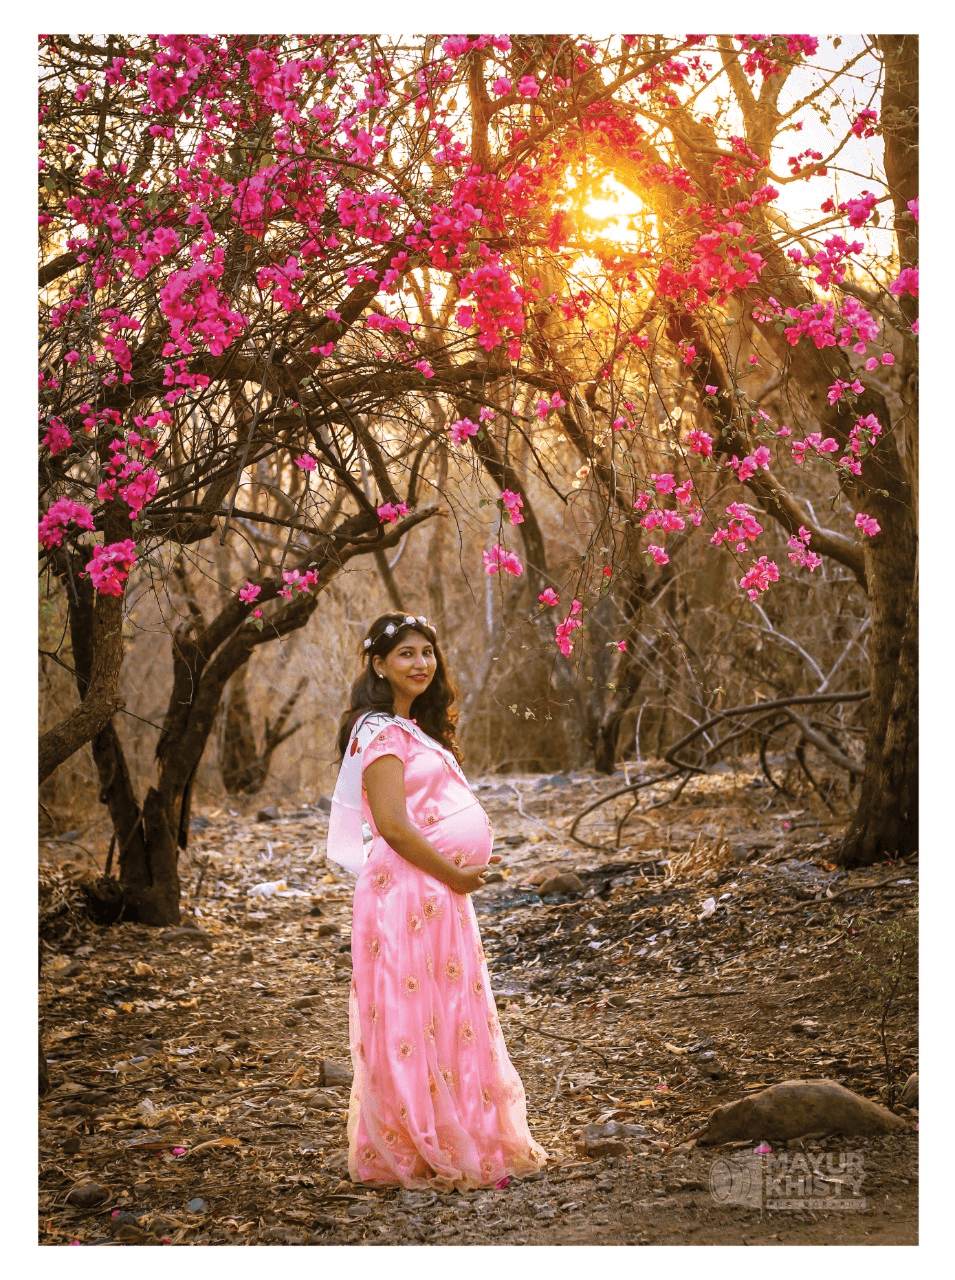 Pregnancy photoshoot near me | Maternity pictures near me | editorial Maternity Photography